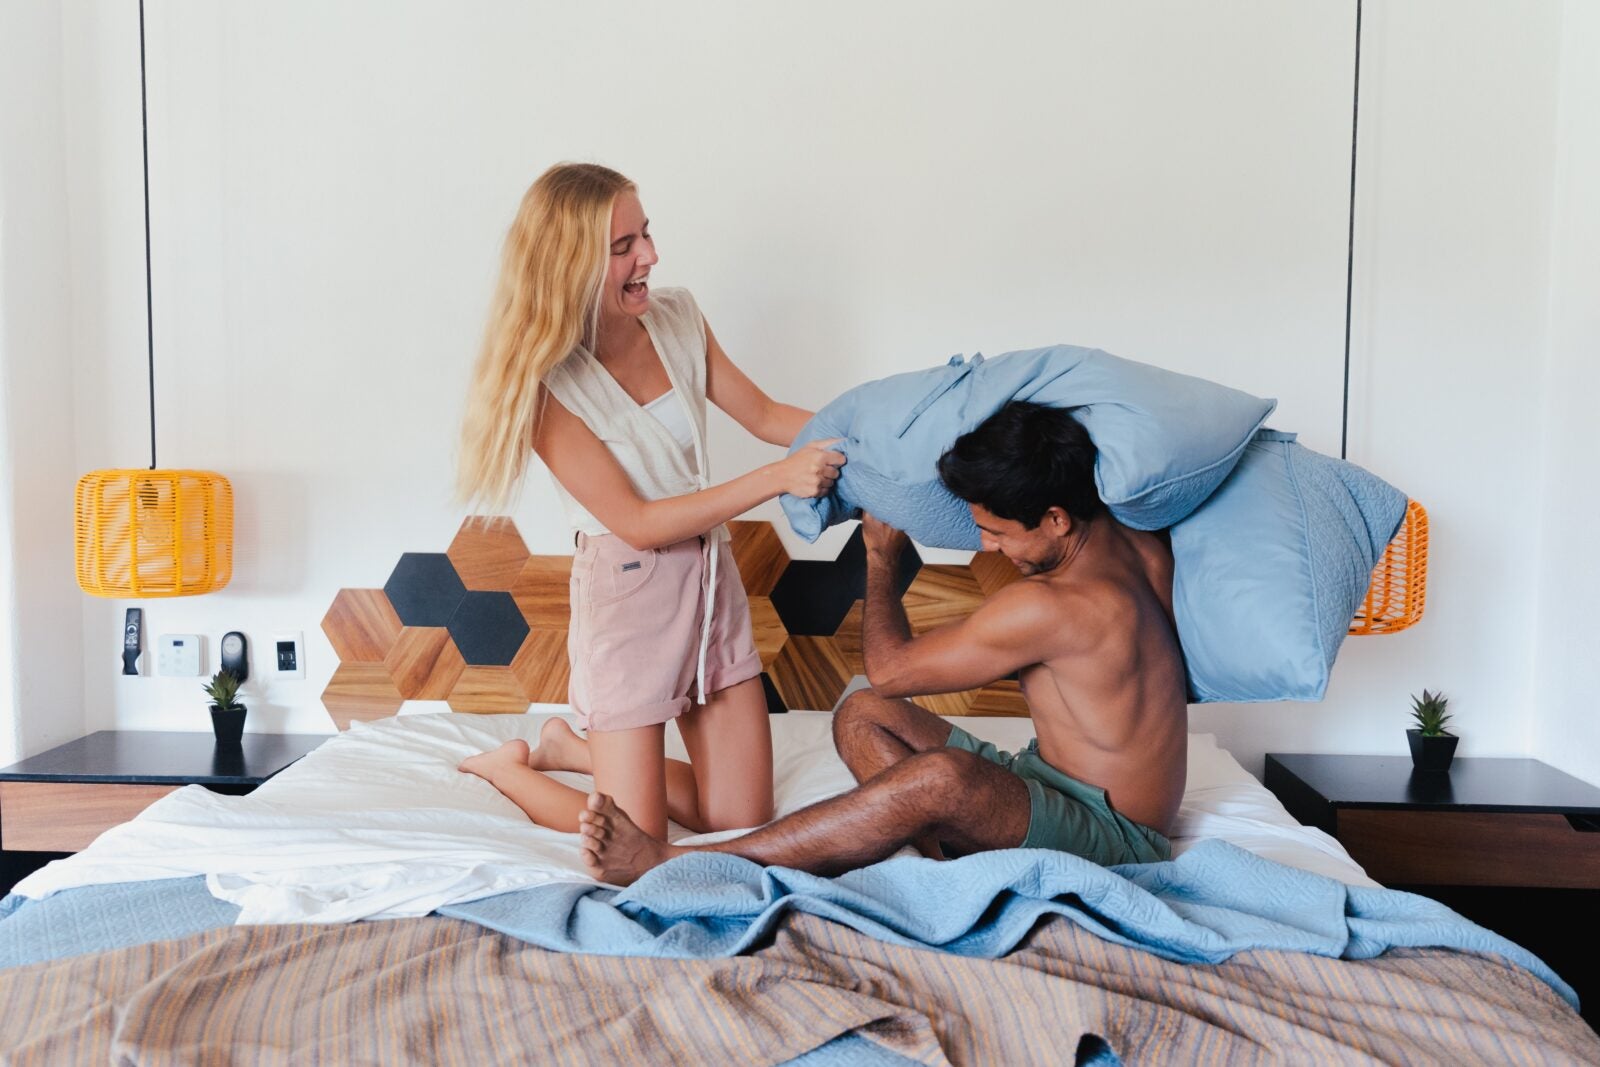 A couple in bed. The woman is hitting the man with a pillow while laughing.